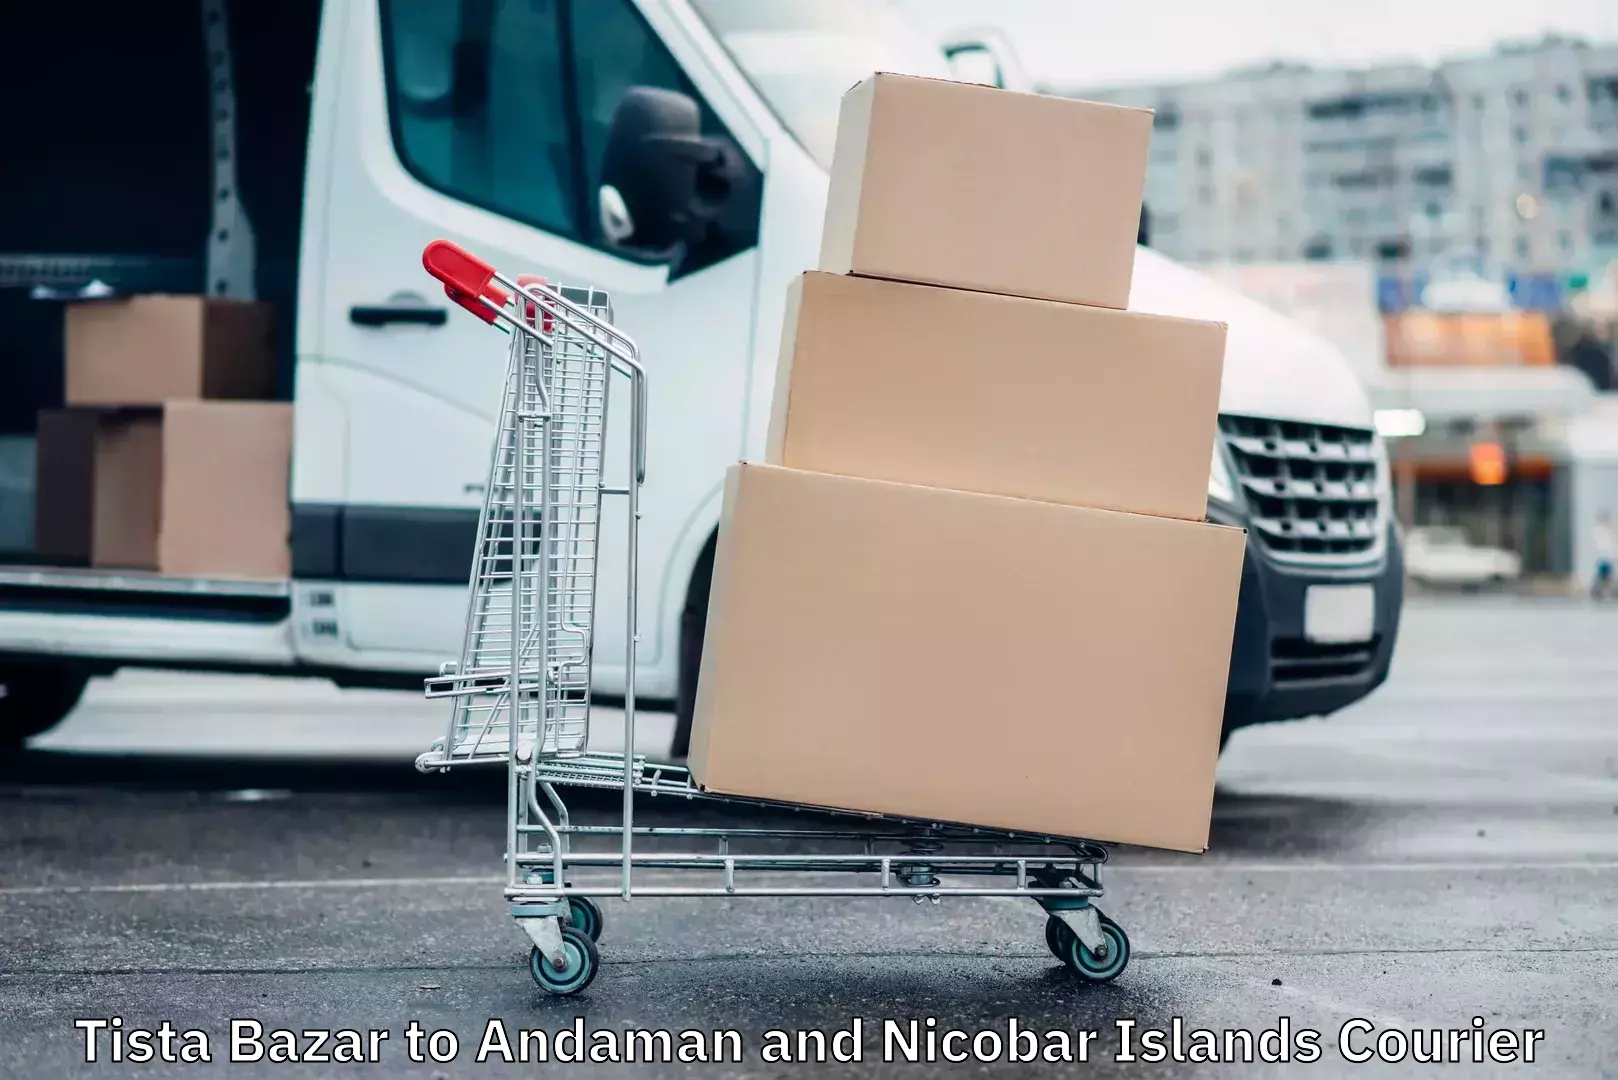 Professional courier handling Tista Bazar to Andaman and Nicobar Islands